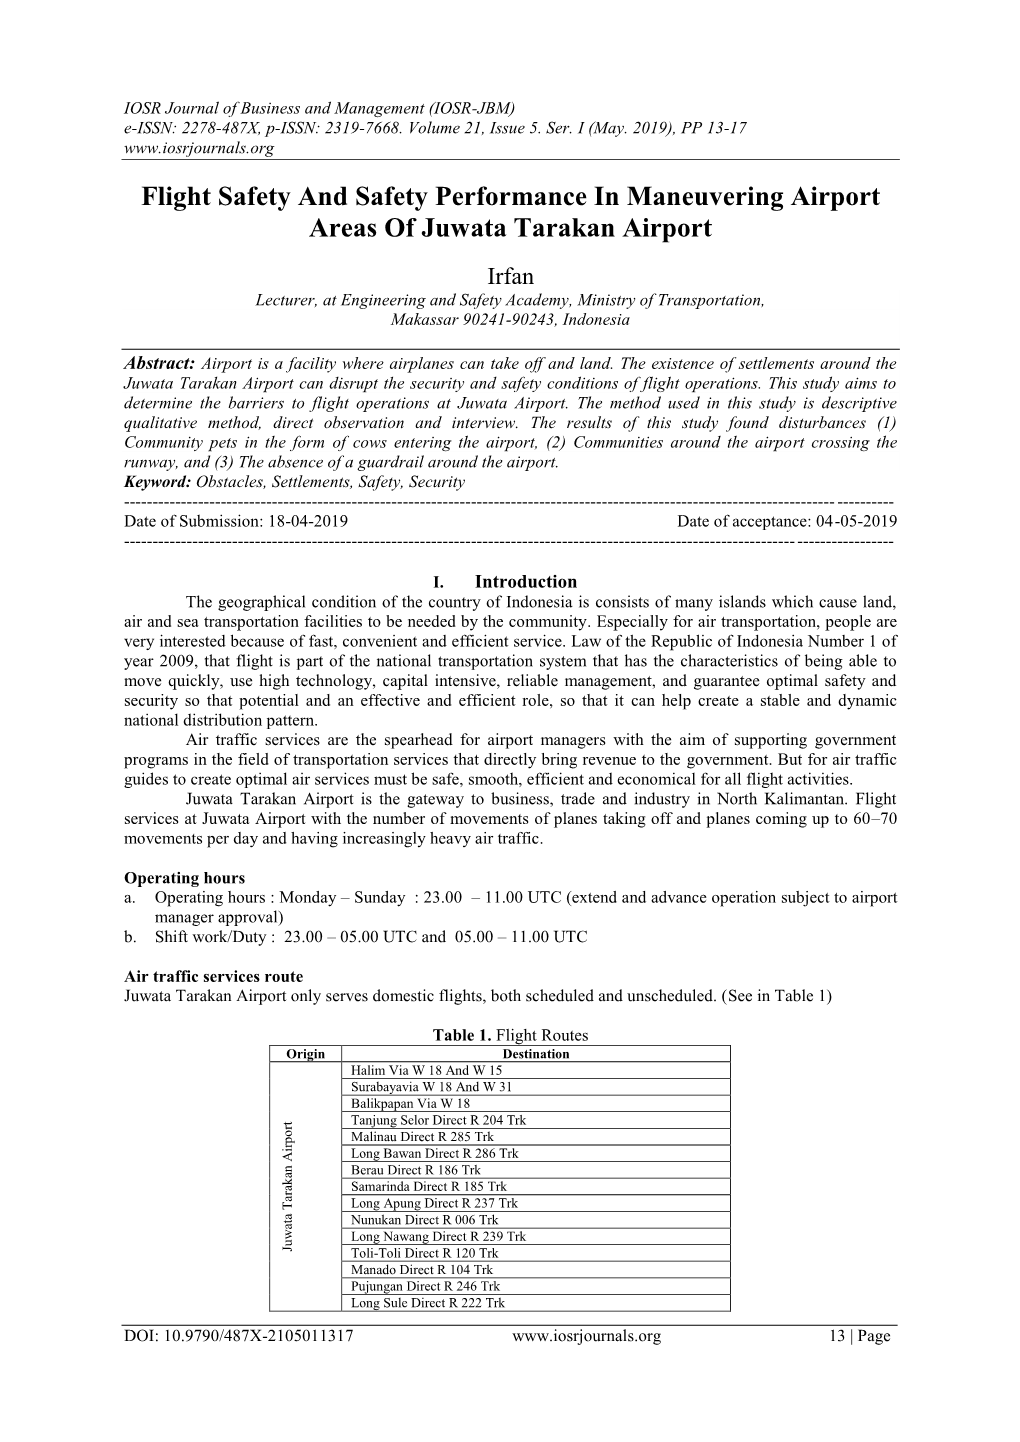 Flight Safety and Safety Performance in Maneuvering Airport Areas of Juwata Tarakan Airport